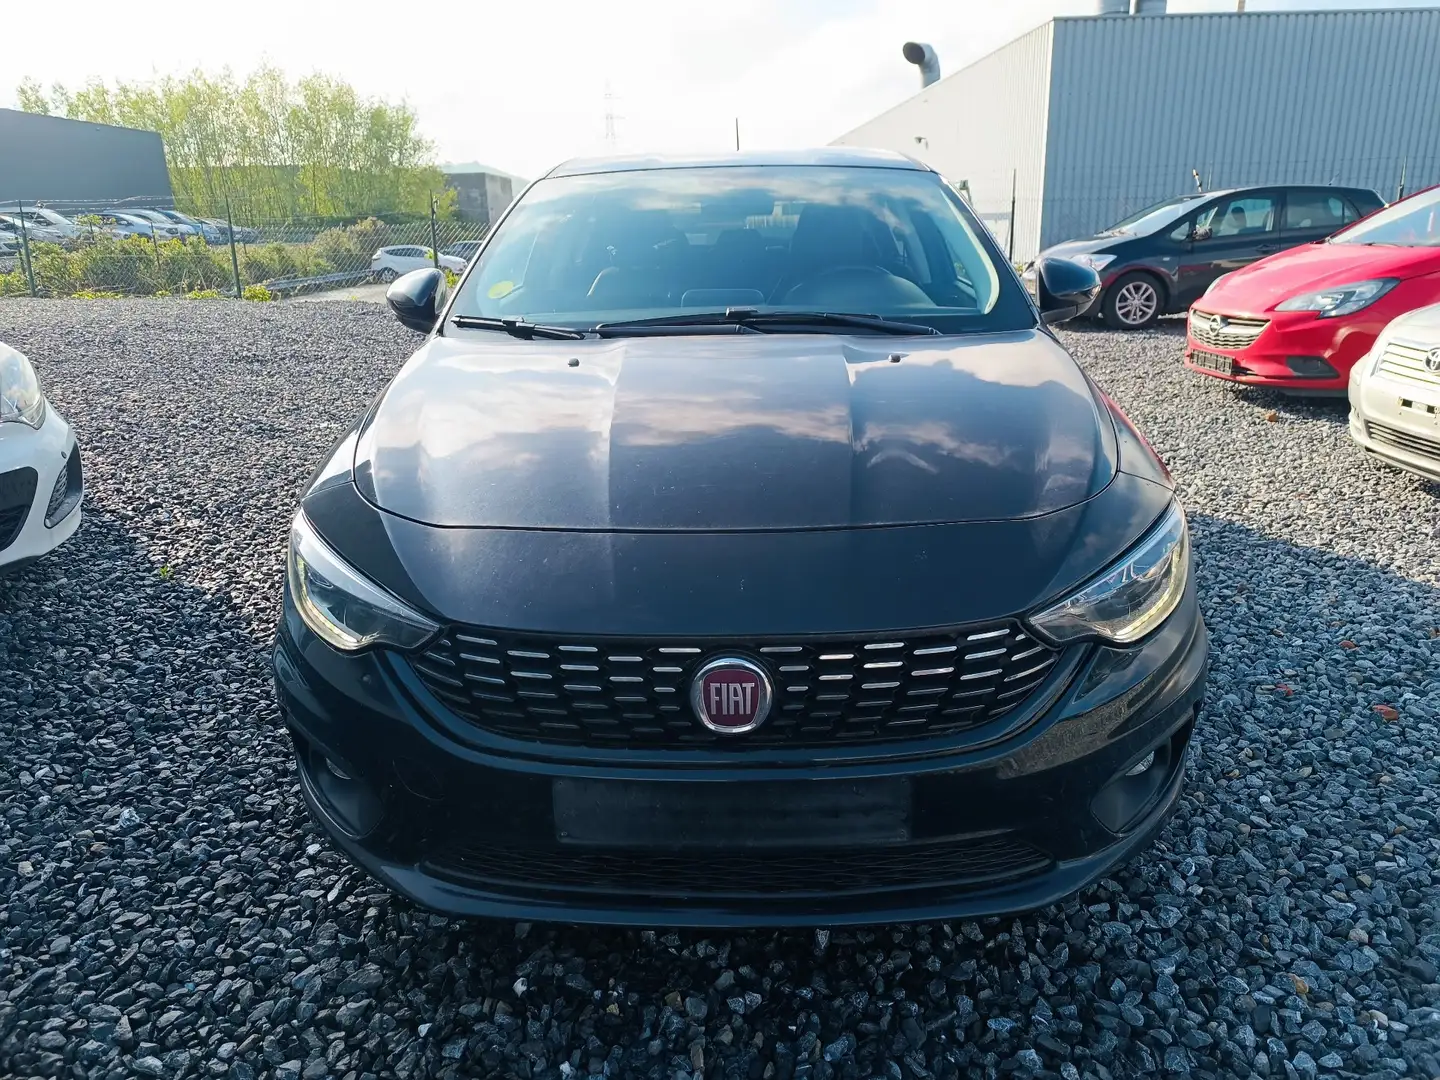 Fiat Tipo 1.6 MULTIJET 115 /AUTOMATIQUE/ MARCHAND OU EXPORT Siyah - 2